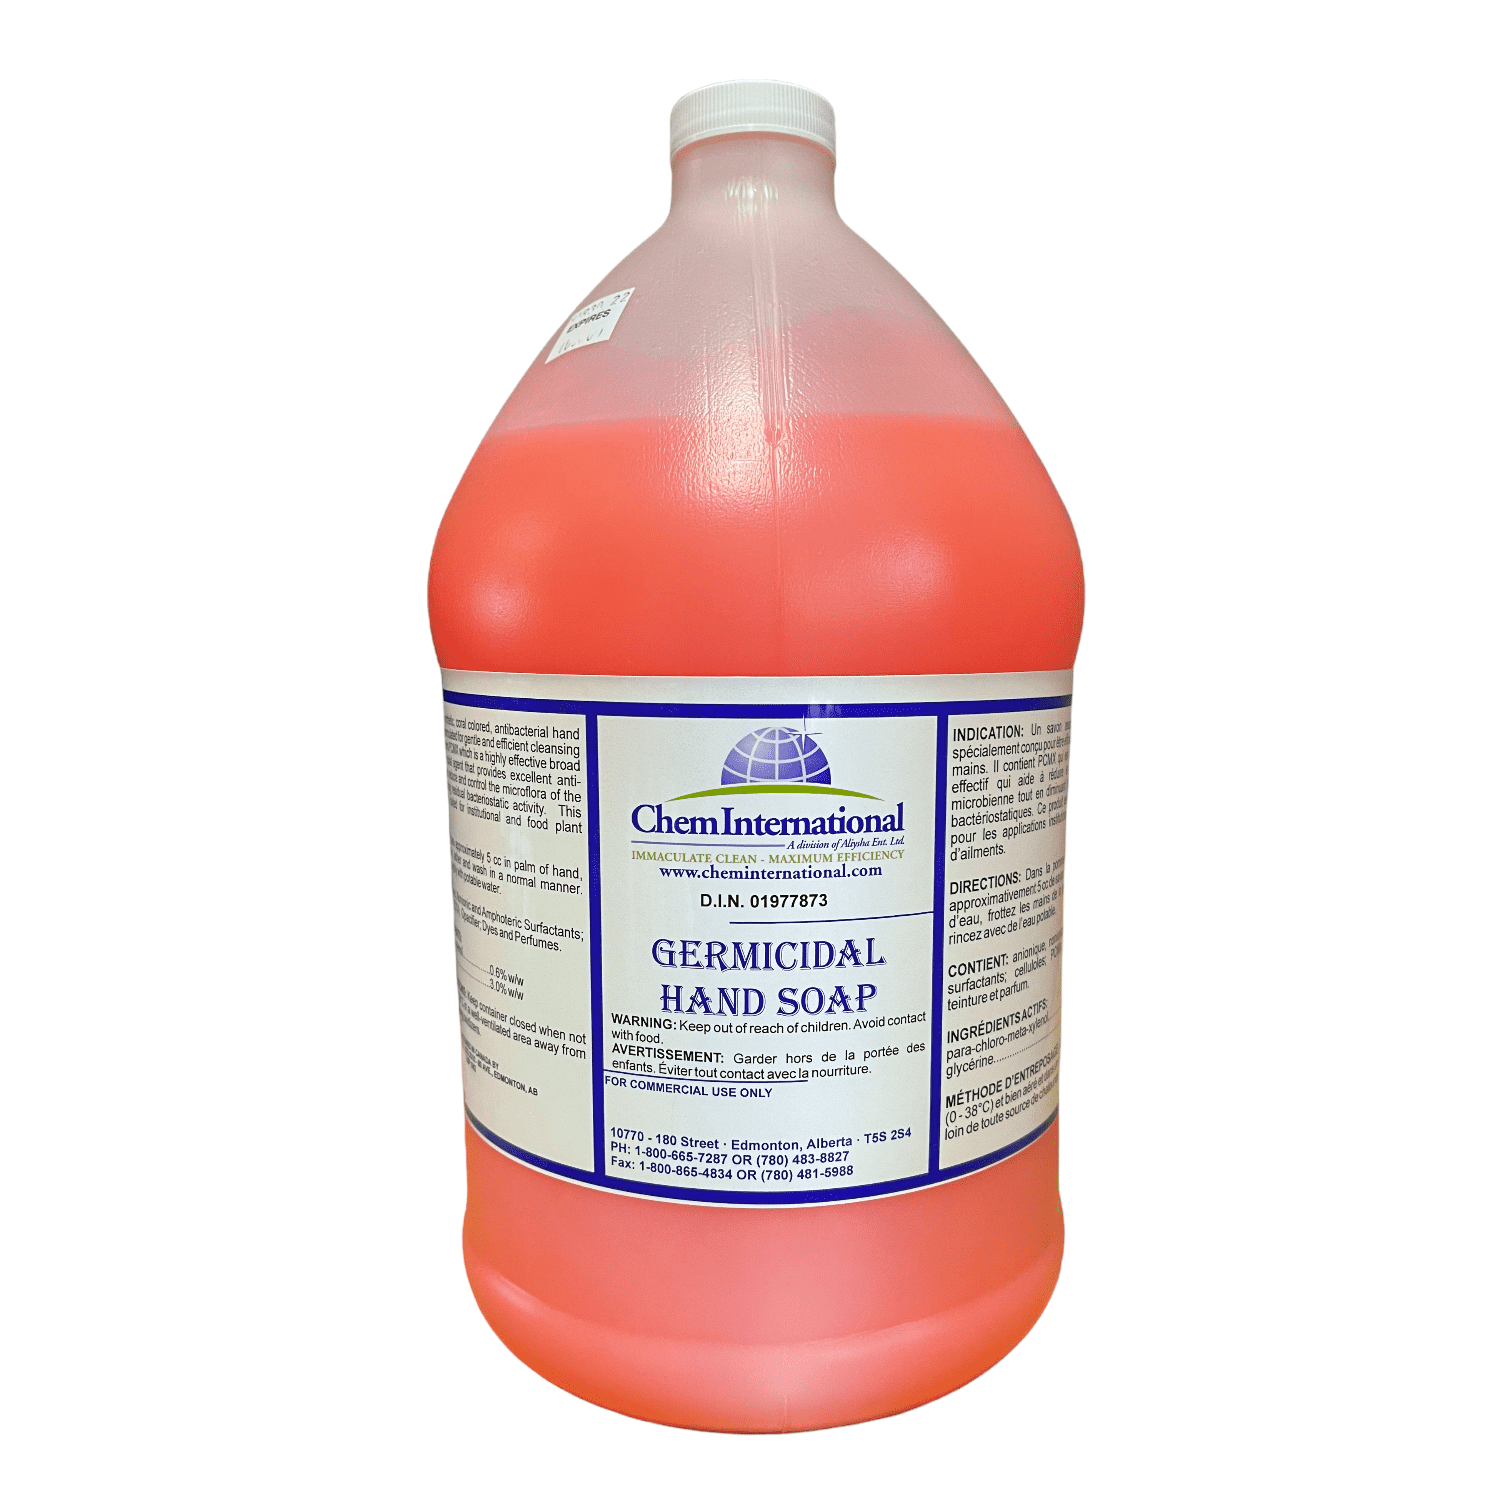 CI GERMICIDAL HAND SOAP The Custodian Commercial Sanitation & Industrial Maintenance Products